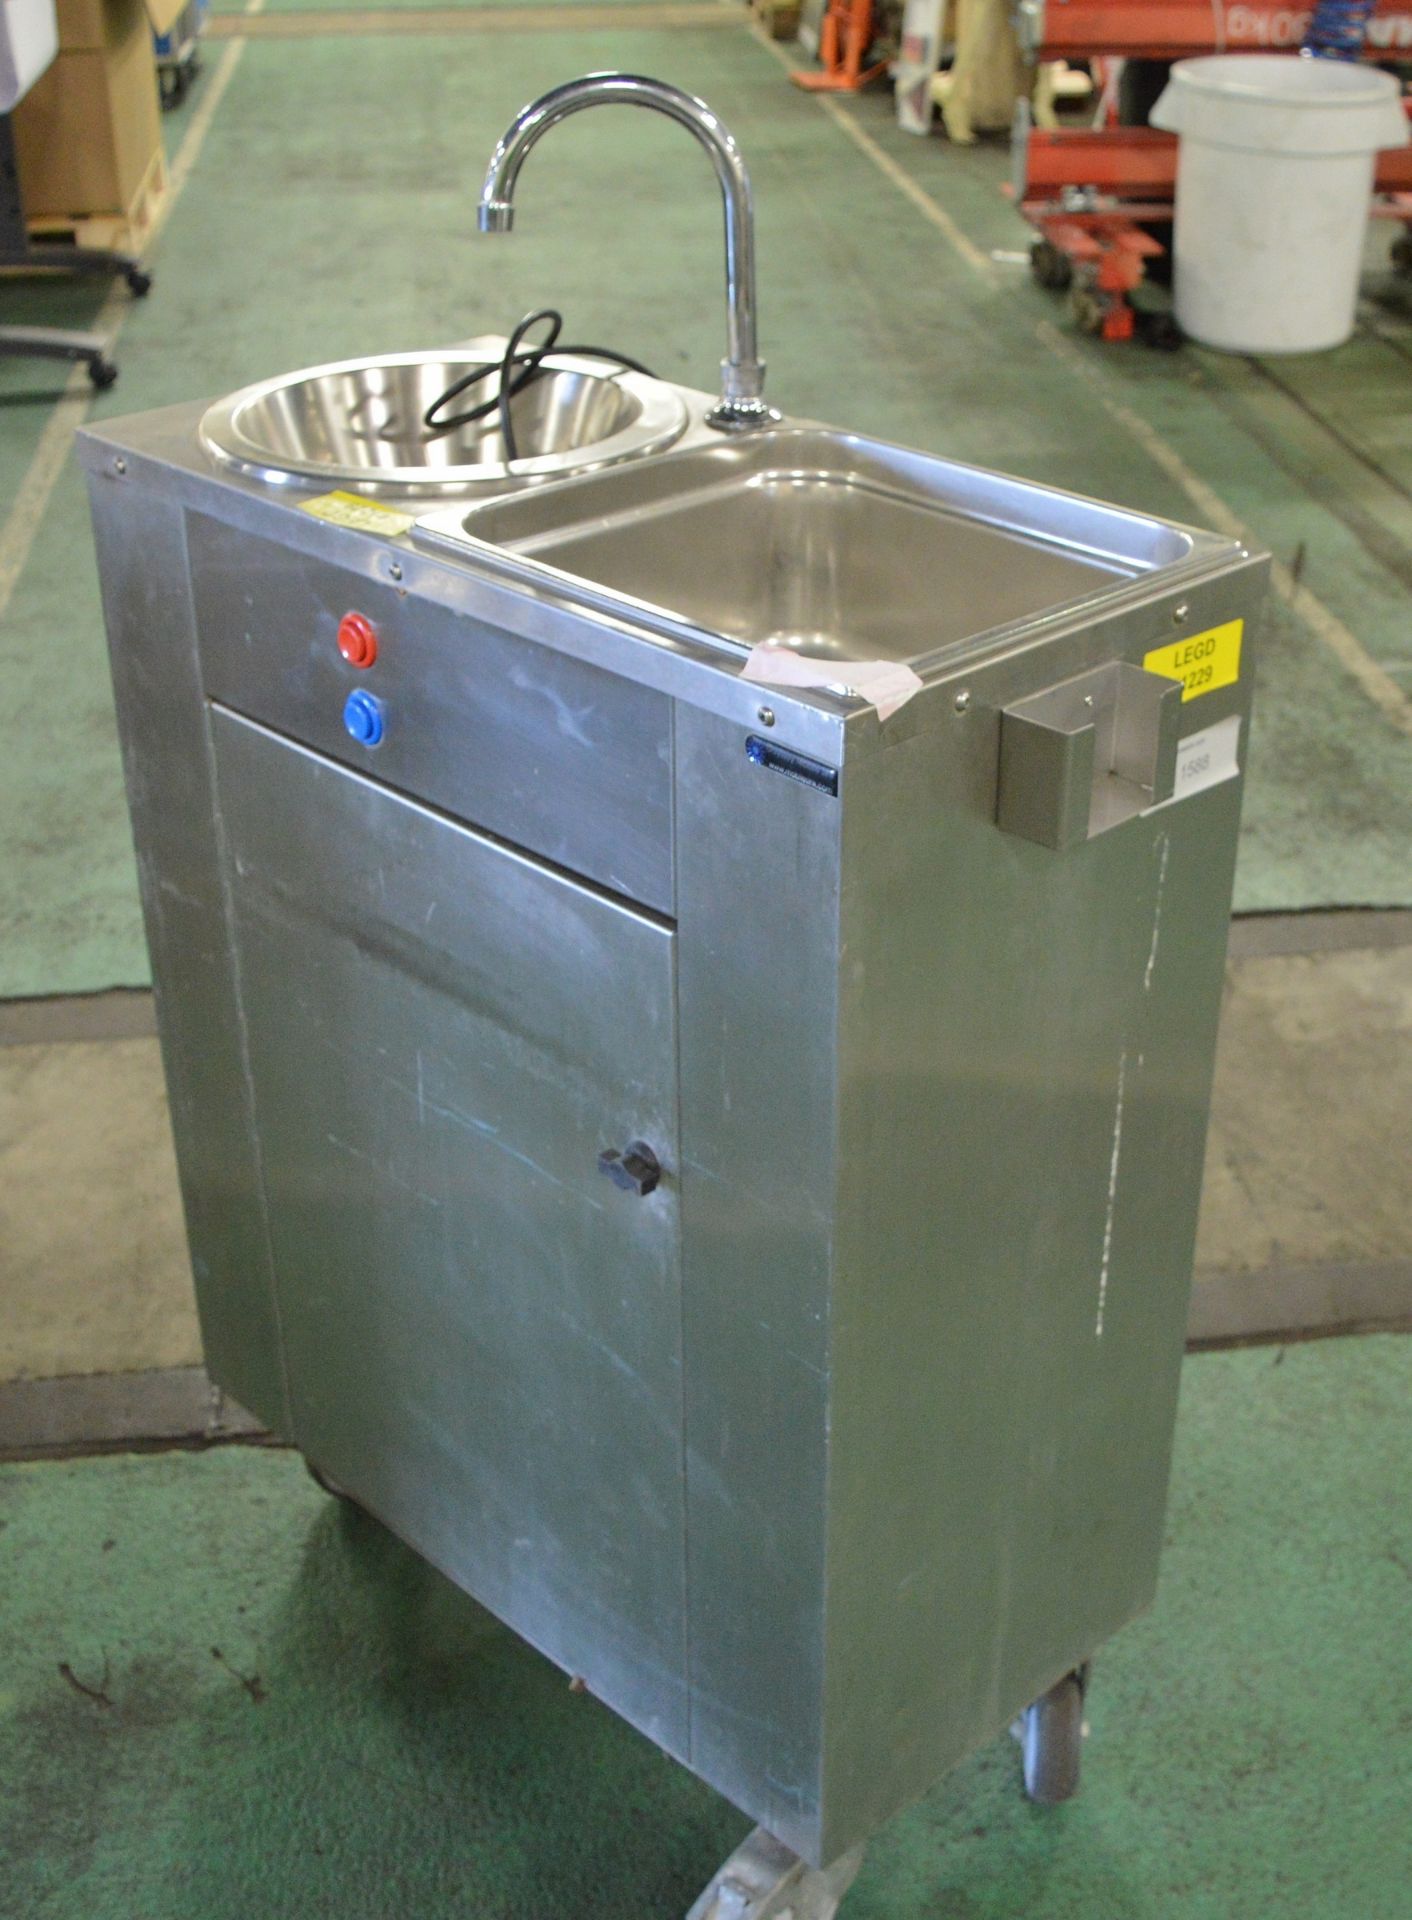 Stainless Steel Mobile Dual Wash Basin - L700 x W350 x H925mm